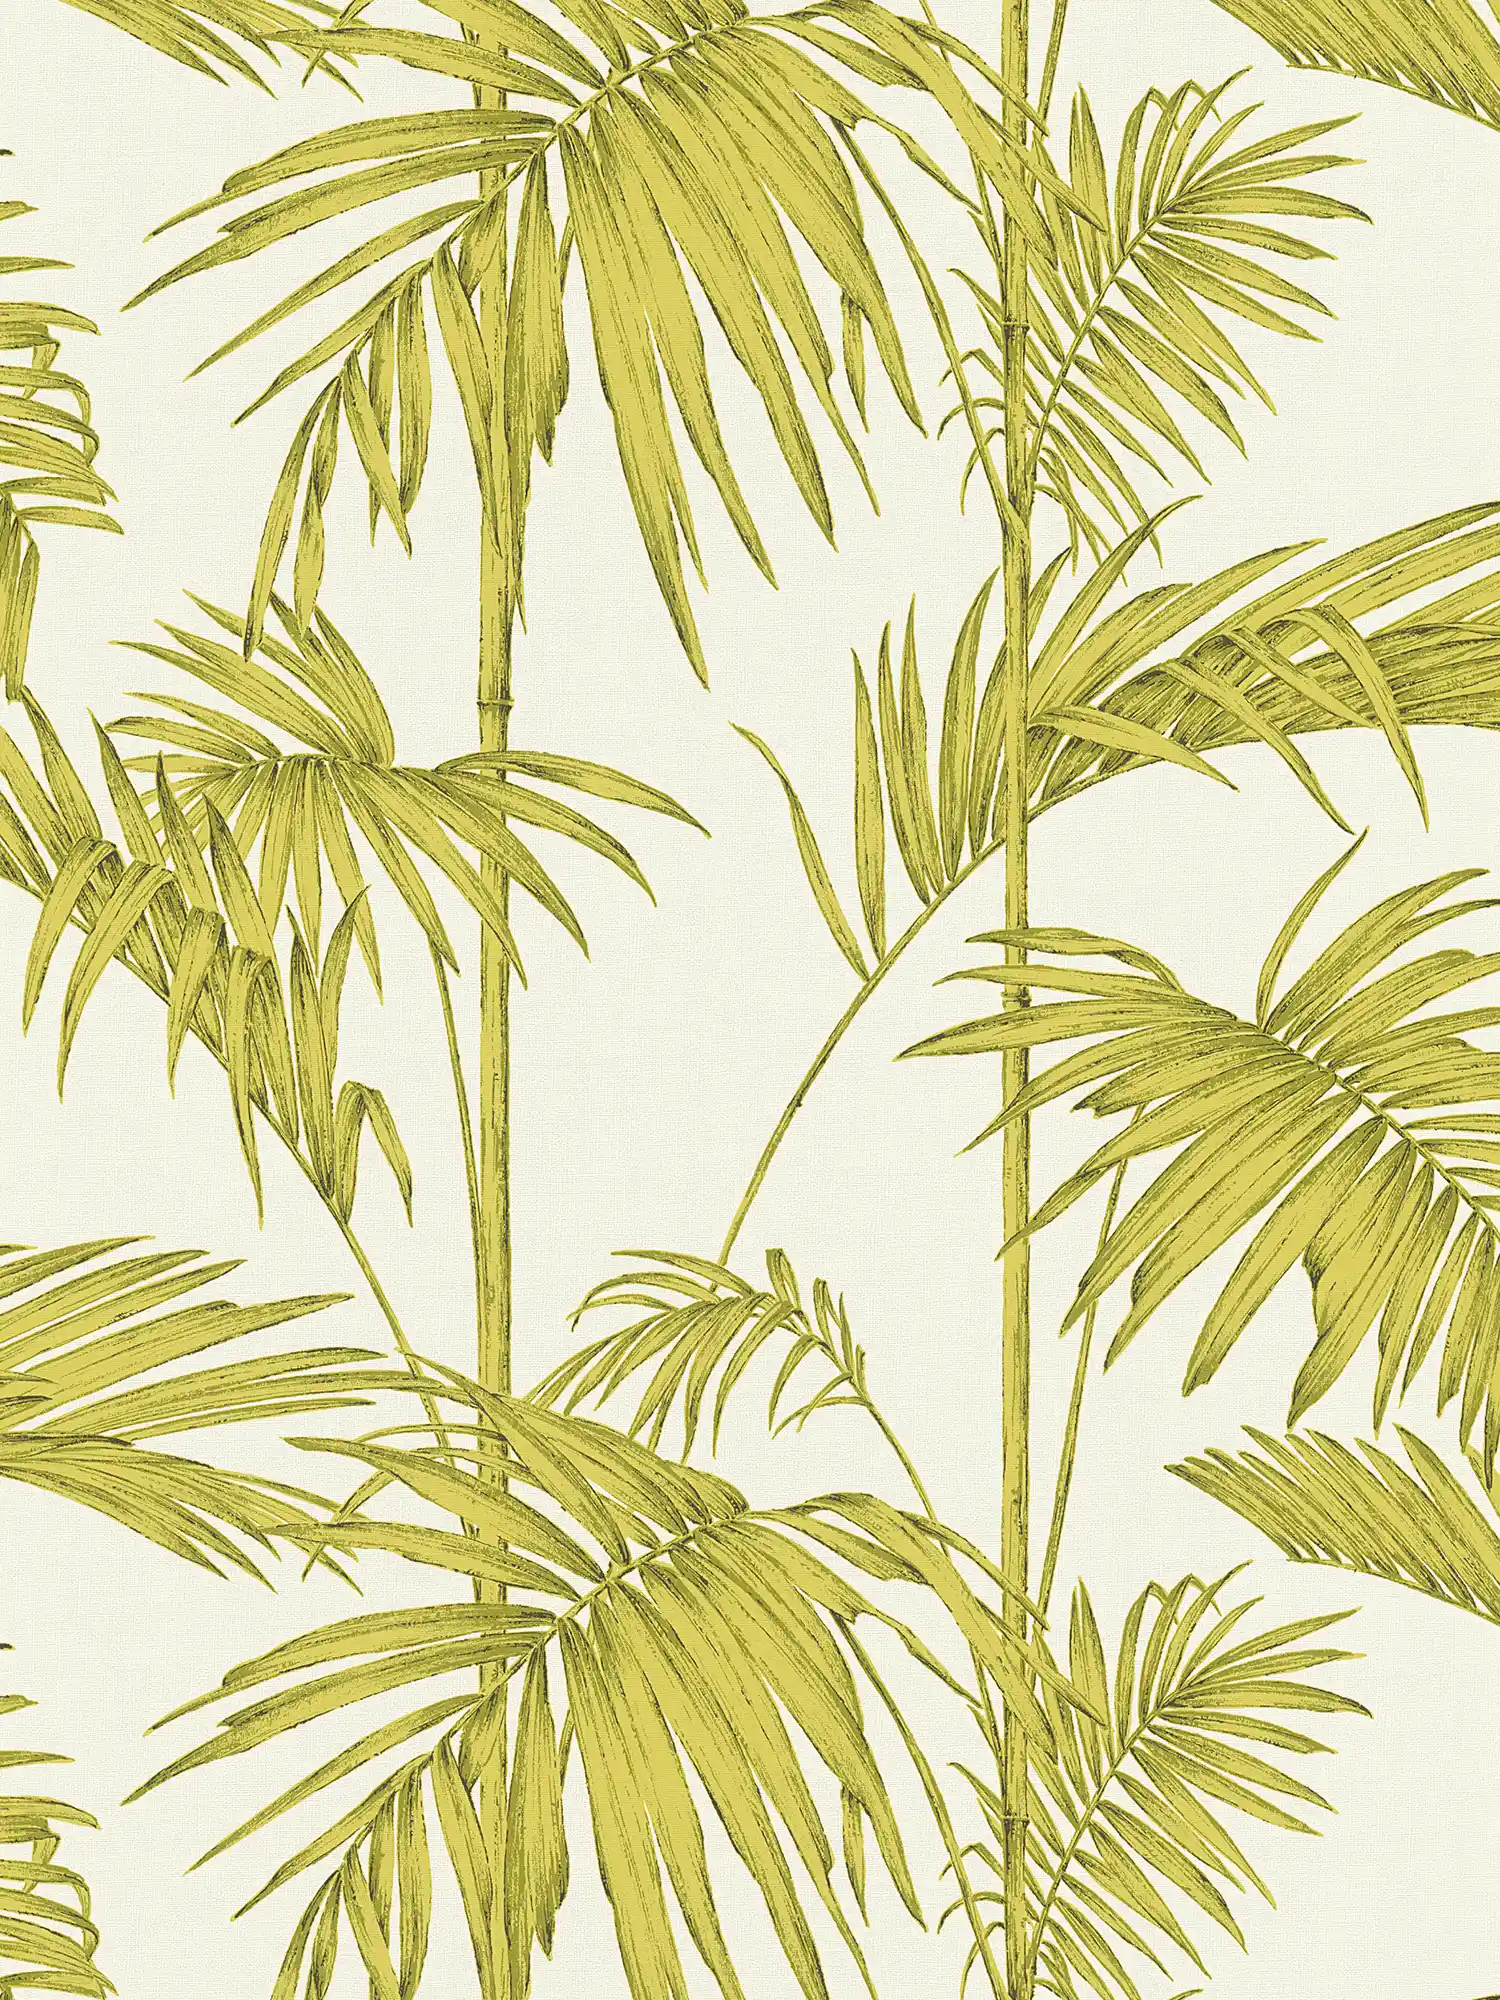 Nature wallpaper palm leaves, bamboo - green, cream
